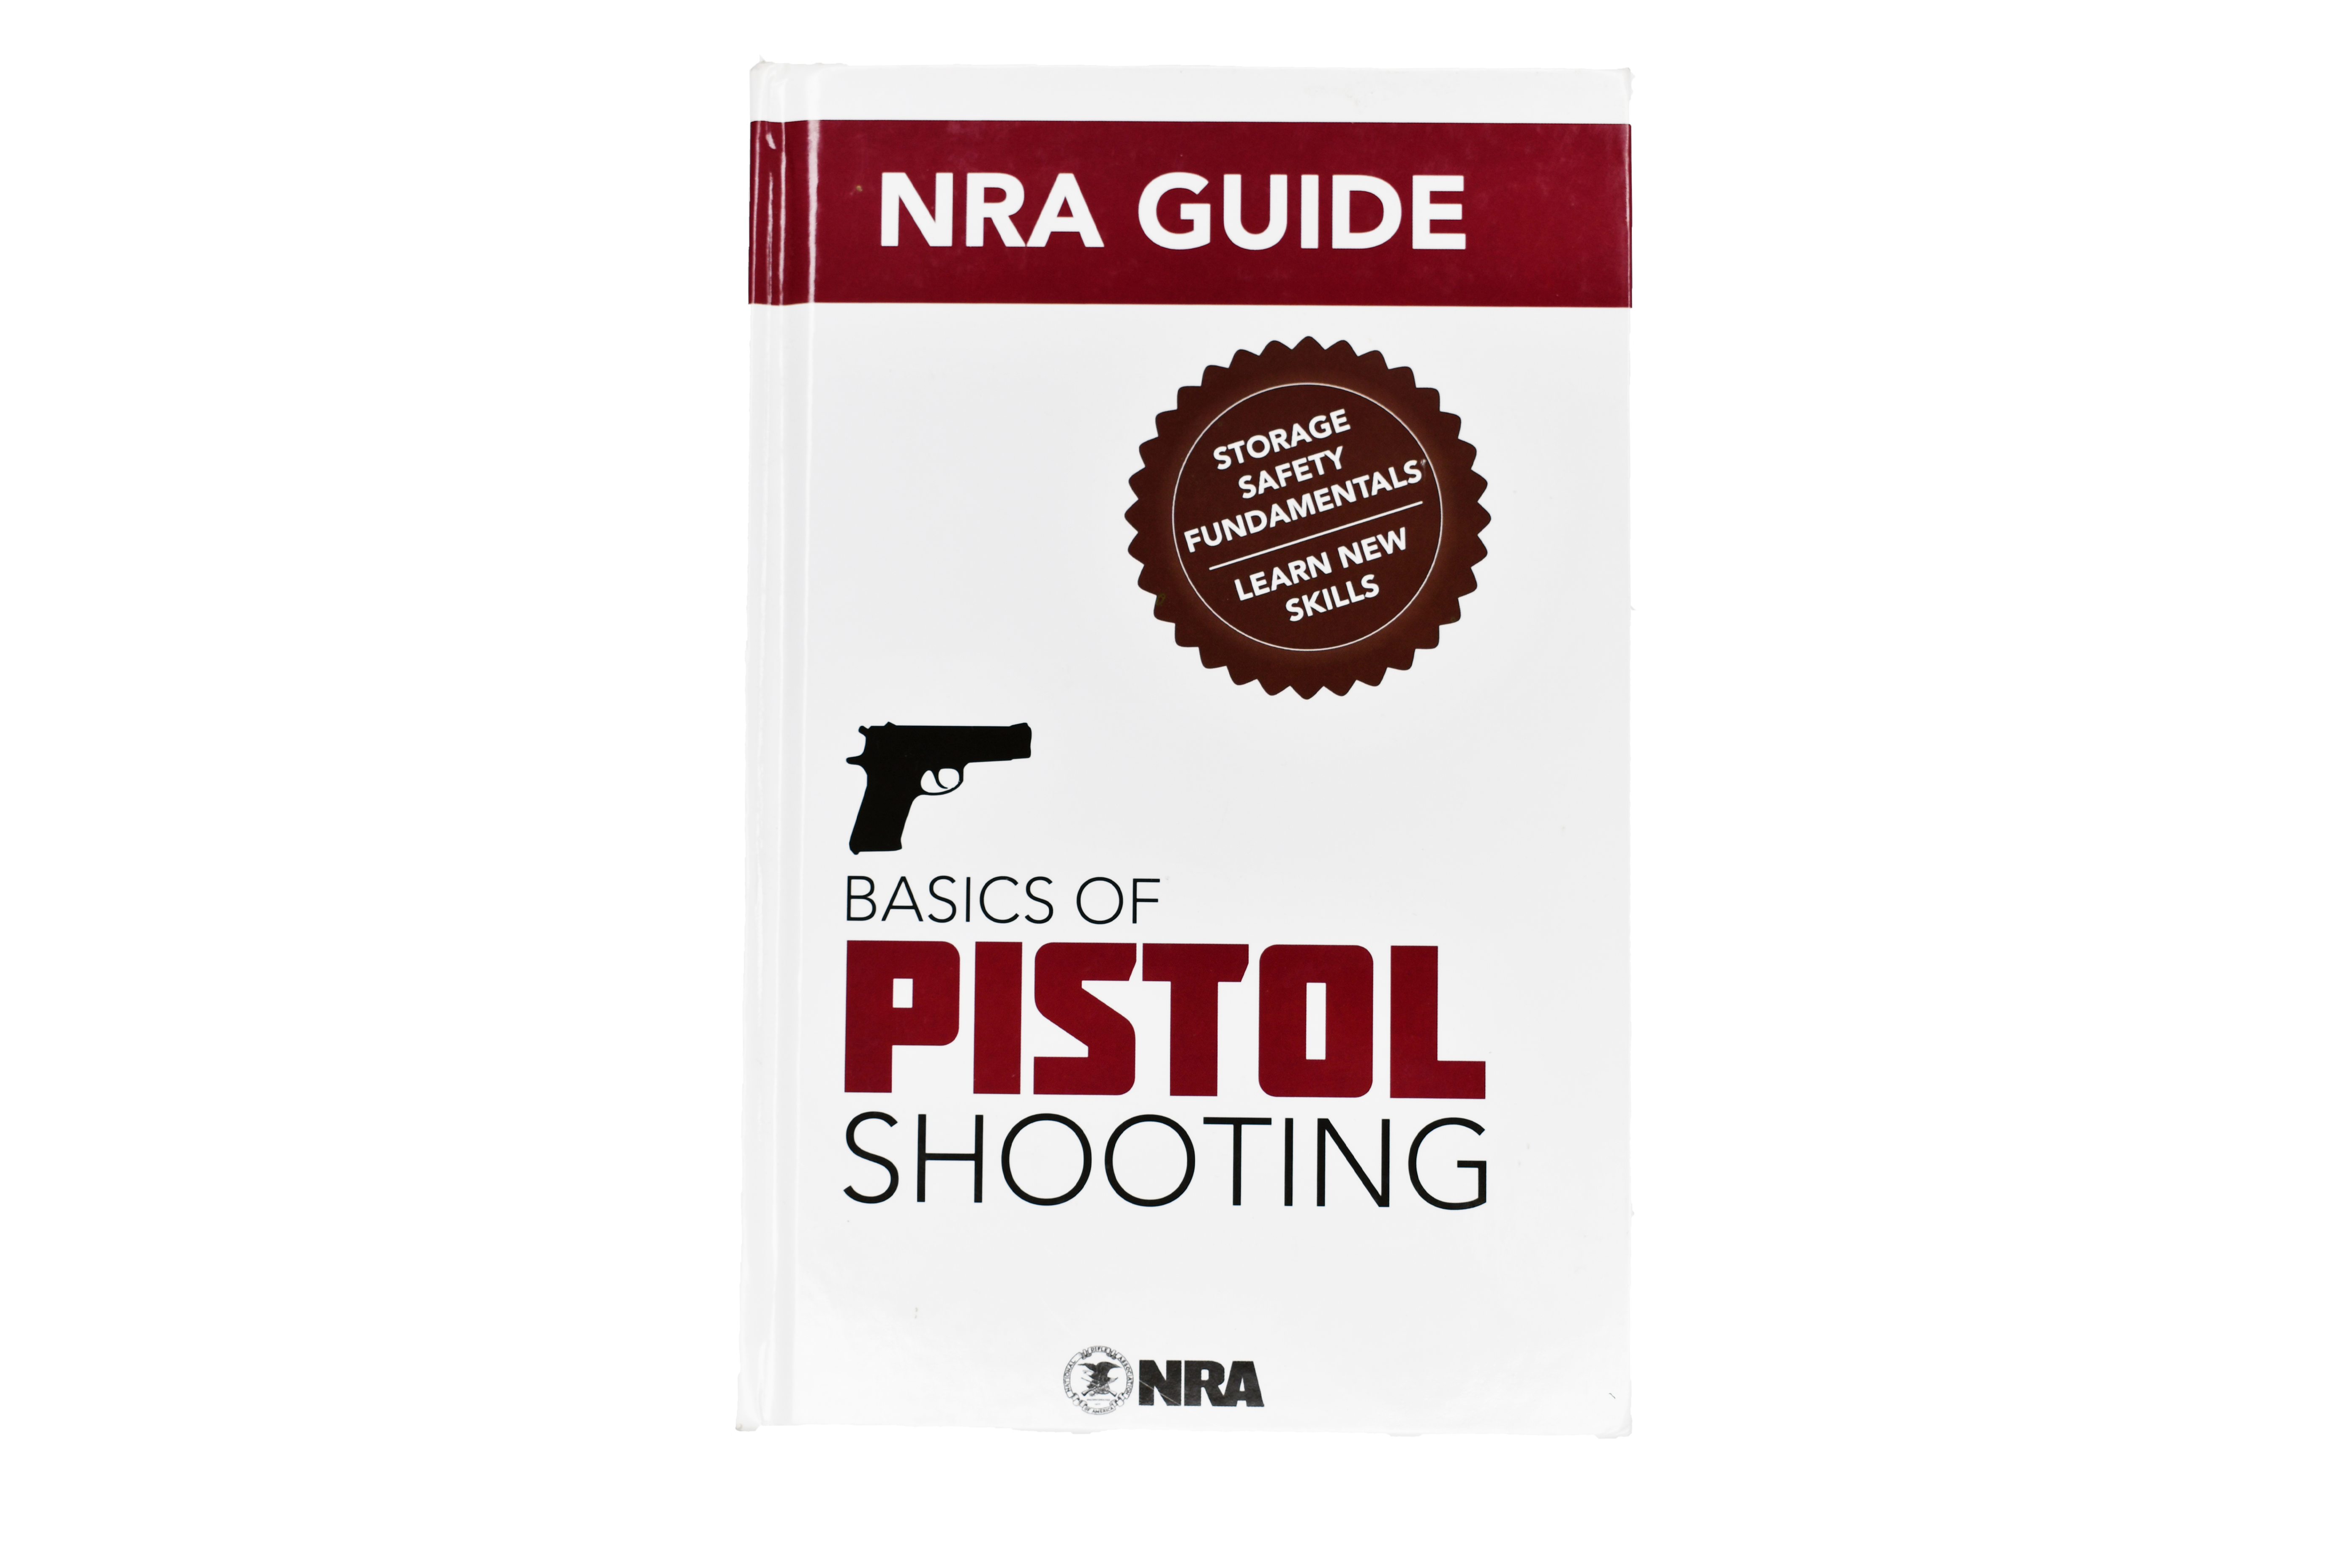 NRA Pistol Instructor Course at CRPA HQ CRPA